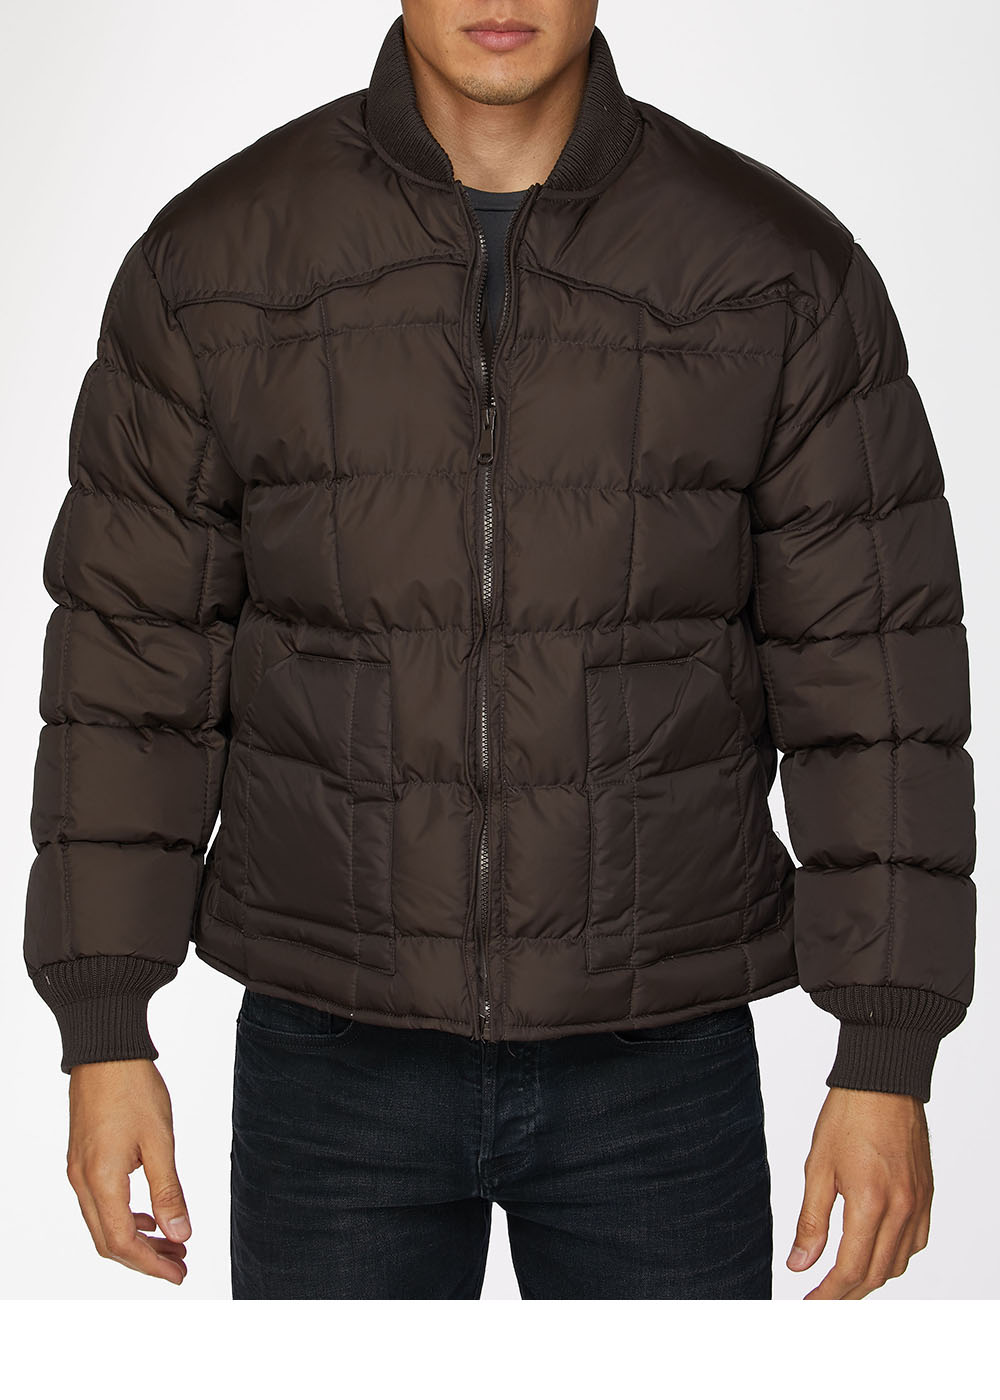 RODEO CLOTHING Men's Western Quilted Nylon Jacket-Brown